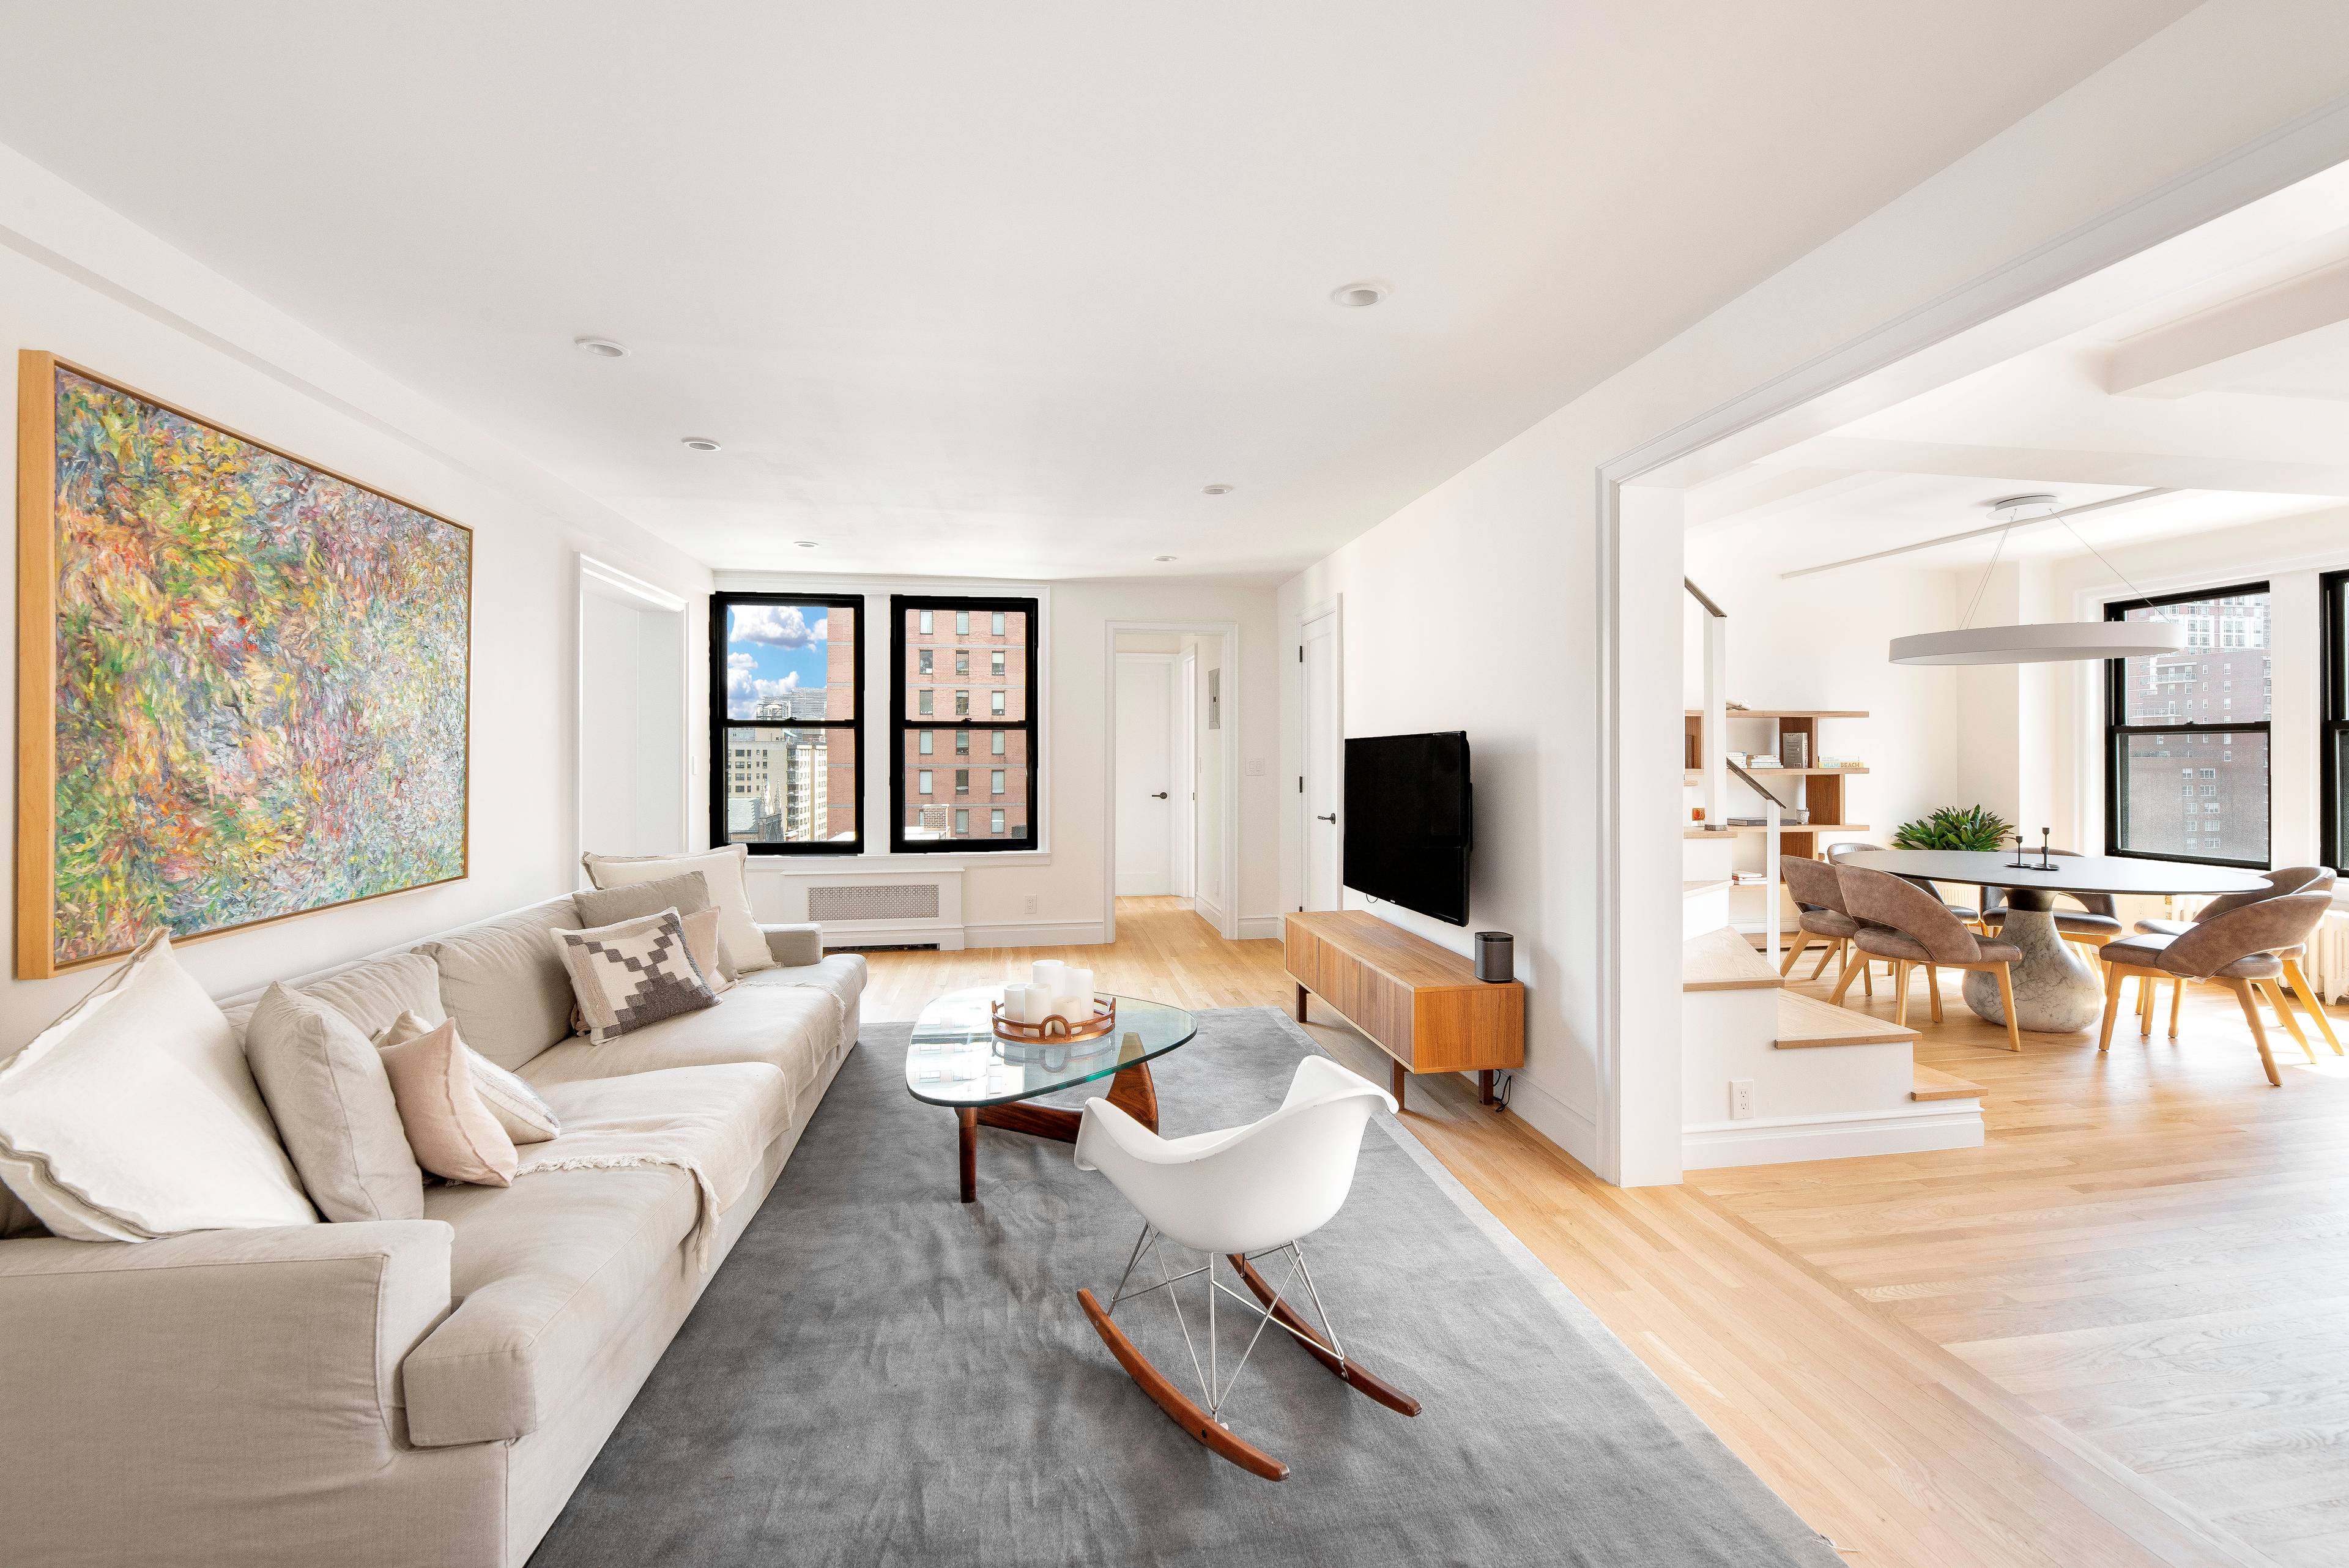 Meticulously renovated pre war three bedroom, three bath duplex home in the ideal Upper East Side neighborhood.